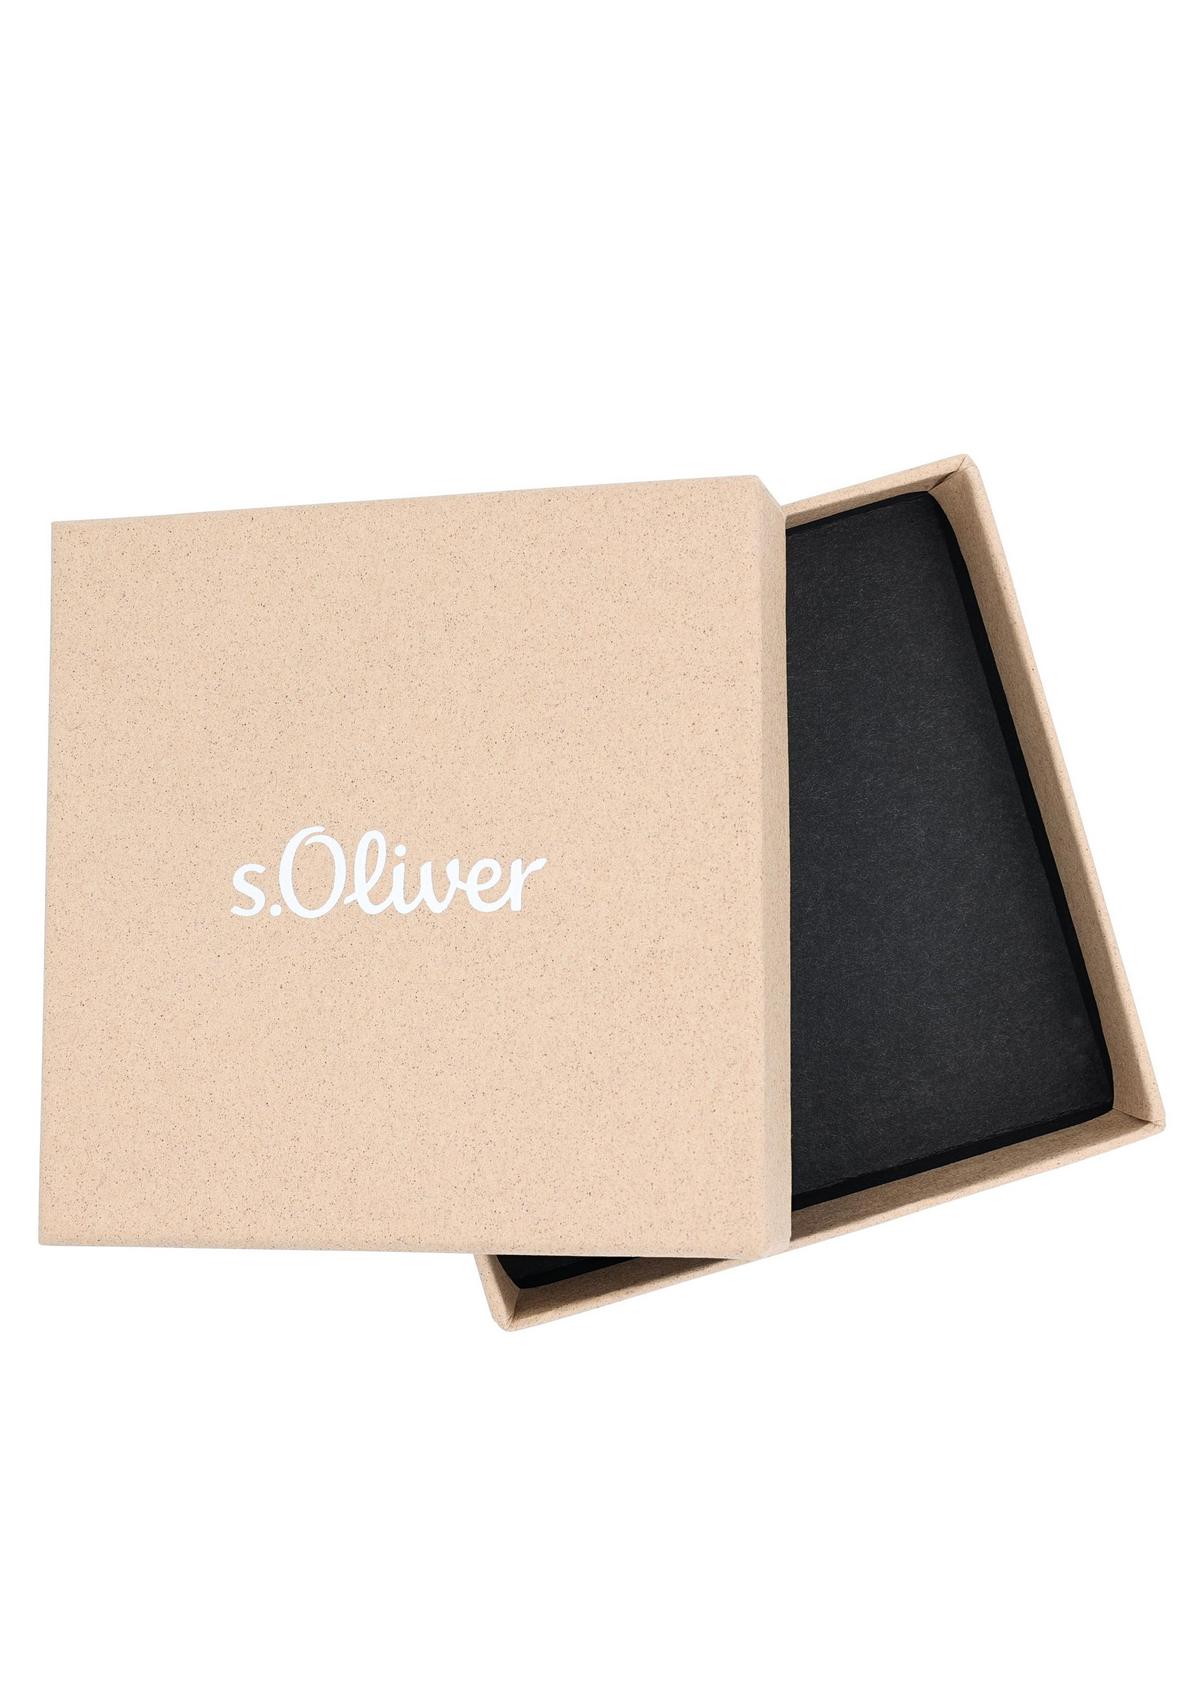 s.Oliver Two-tone armband van edelstaal